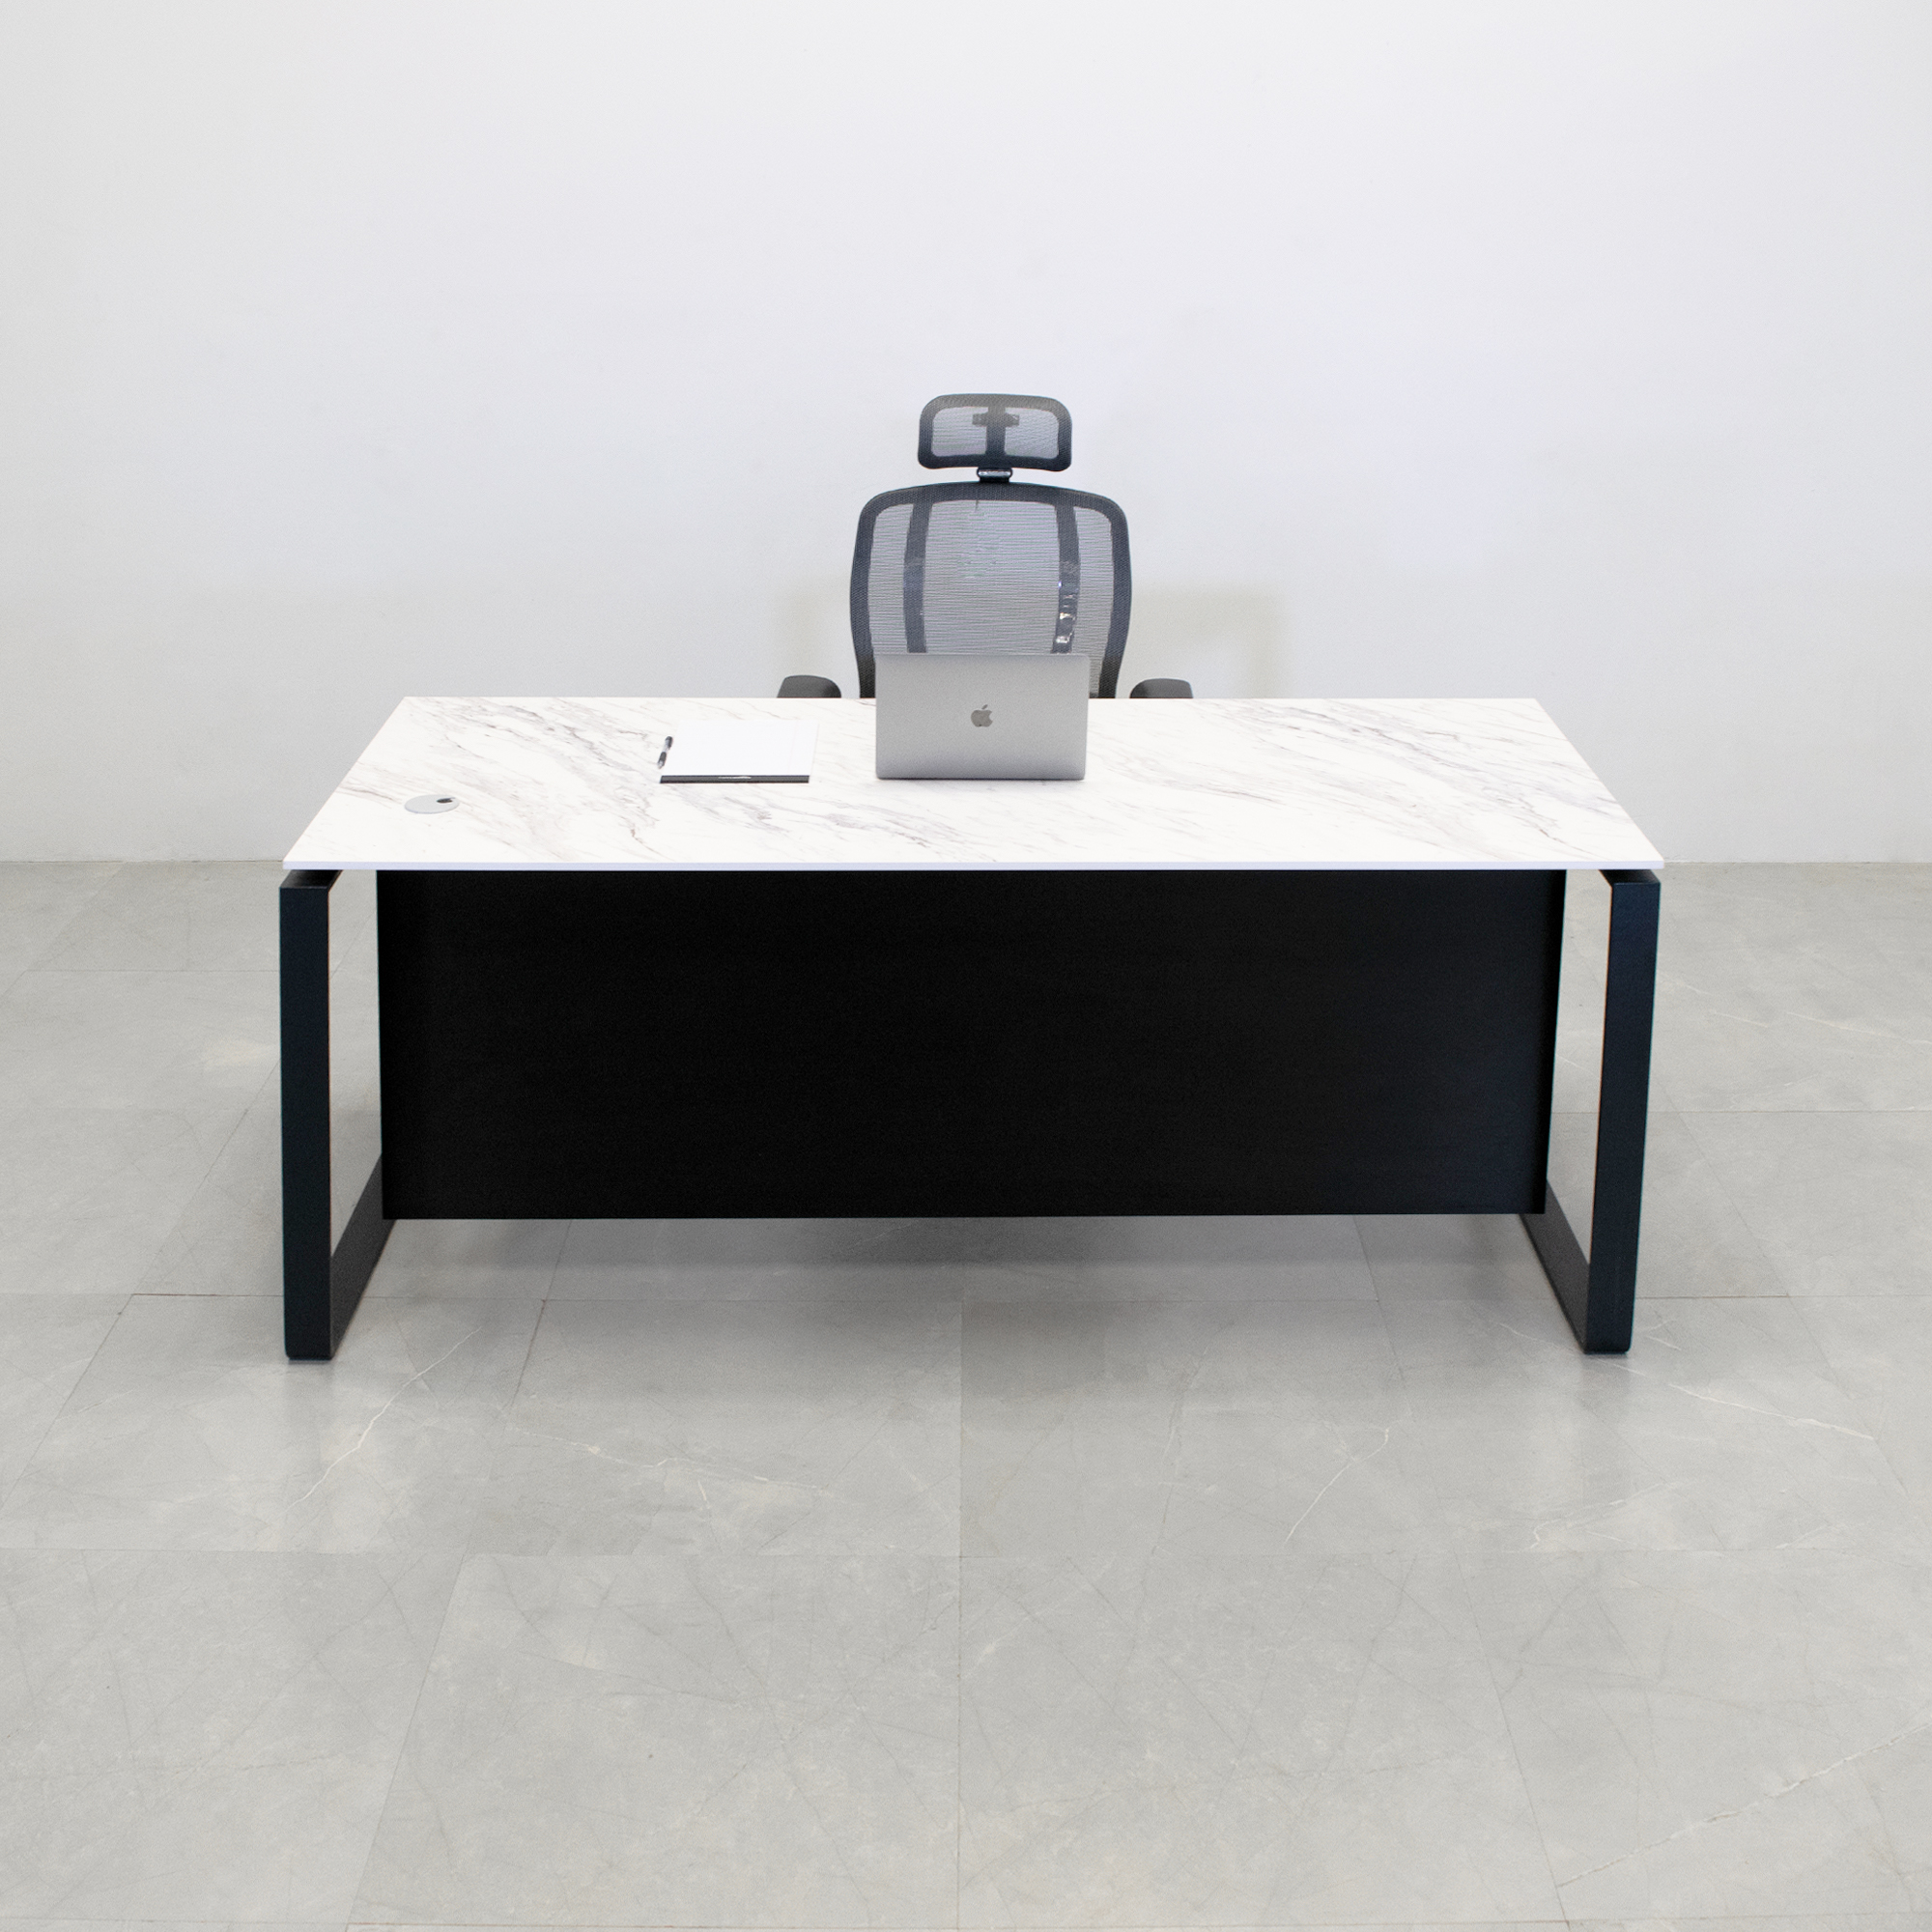 Aspen Straight Executive Desk With Engineered Stone Top in calcutta blanc top, black traceless laminate privacy panel and black metal legs shown here.